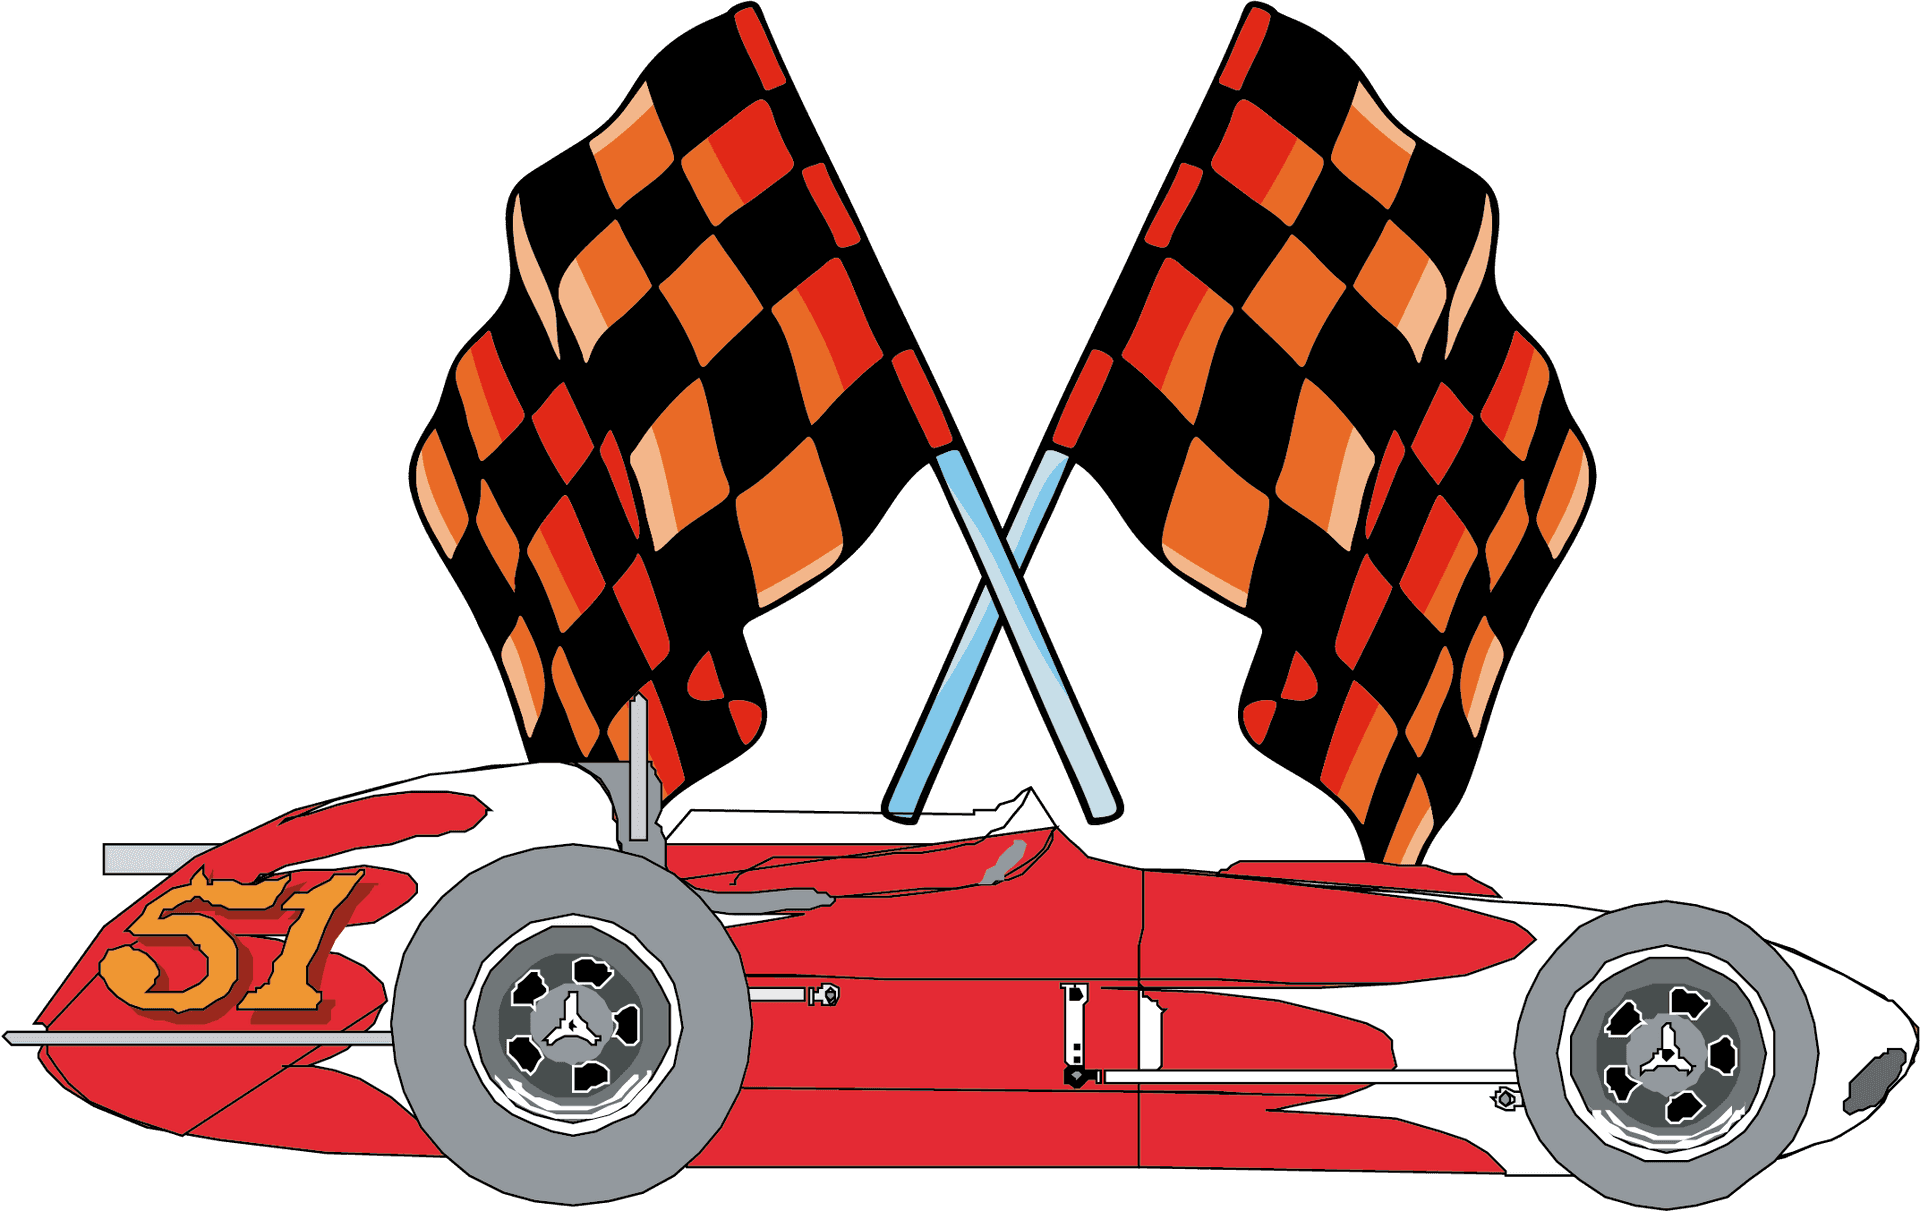 Race Car Number51 With Checkered Flags PNG image